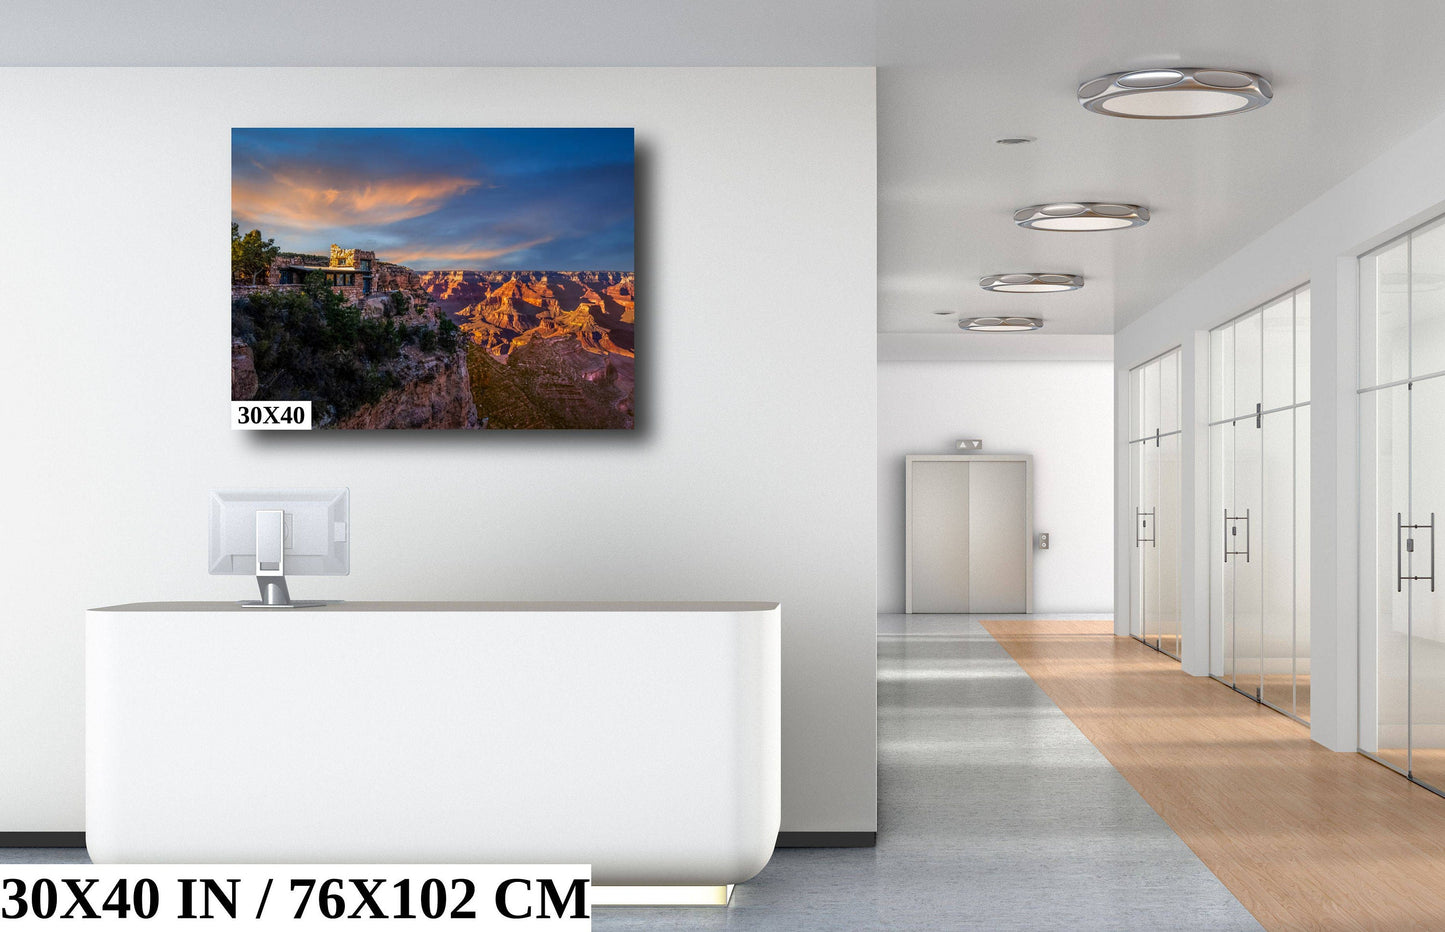 Rim's Edge Elegance: Mary Colter's Lookout Studio Photography Grand Canyon Viewpoints Canvas Print Landscape Wall Art